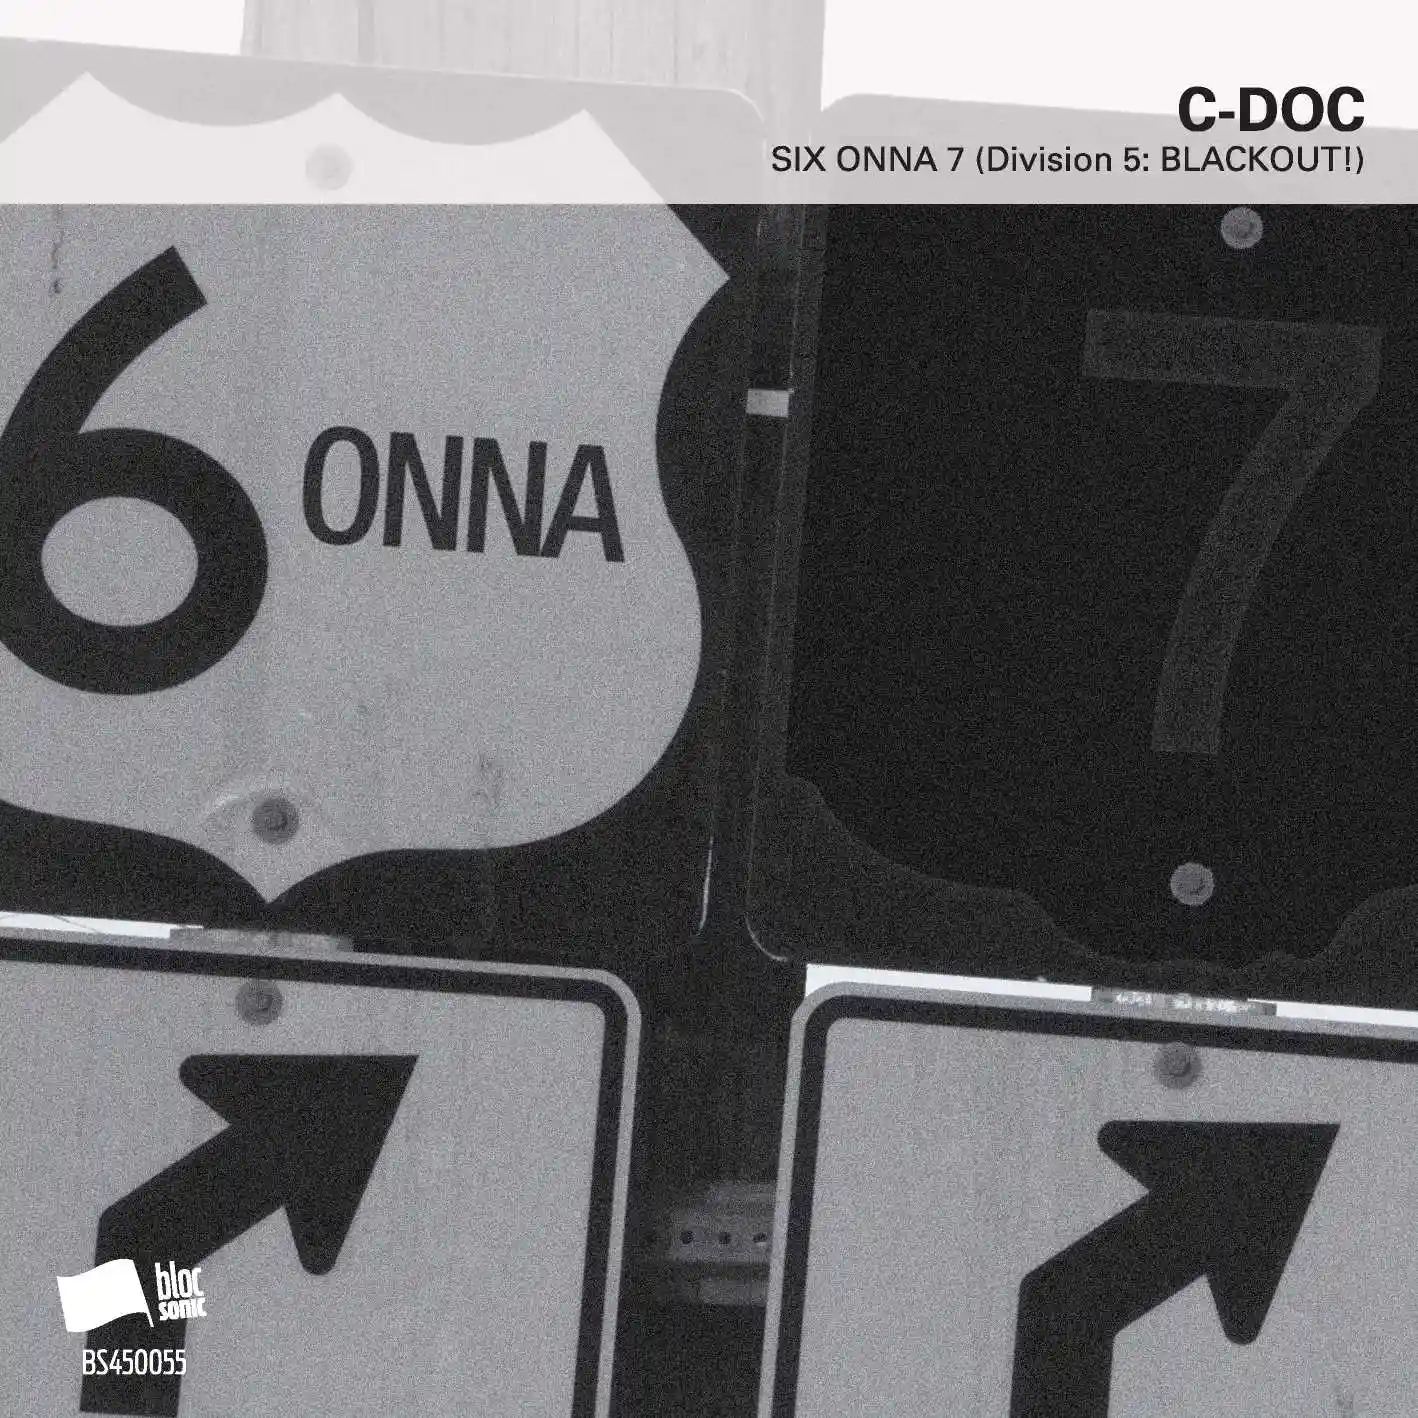 Album cover for “SIX ONNA 7 (Division 5: BLACKOUT!)” by C-Doc